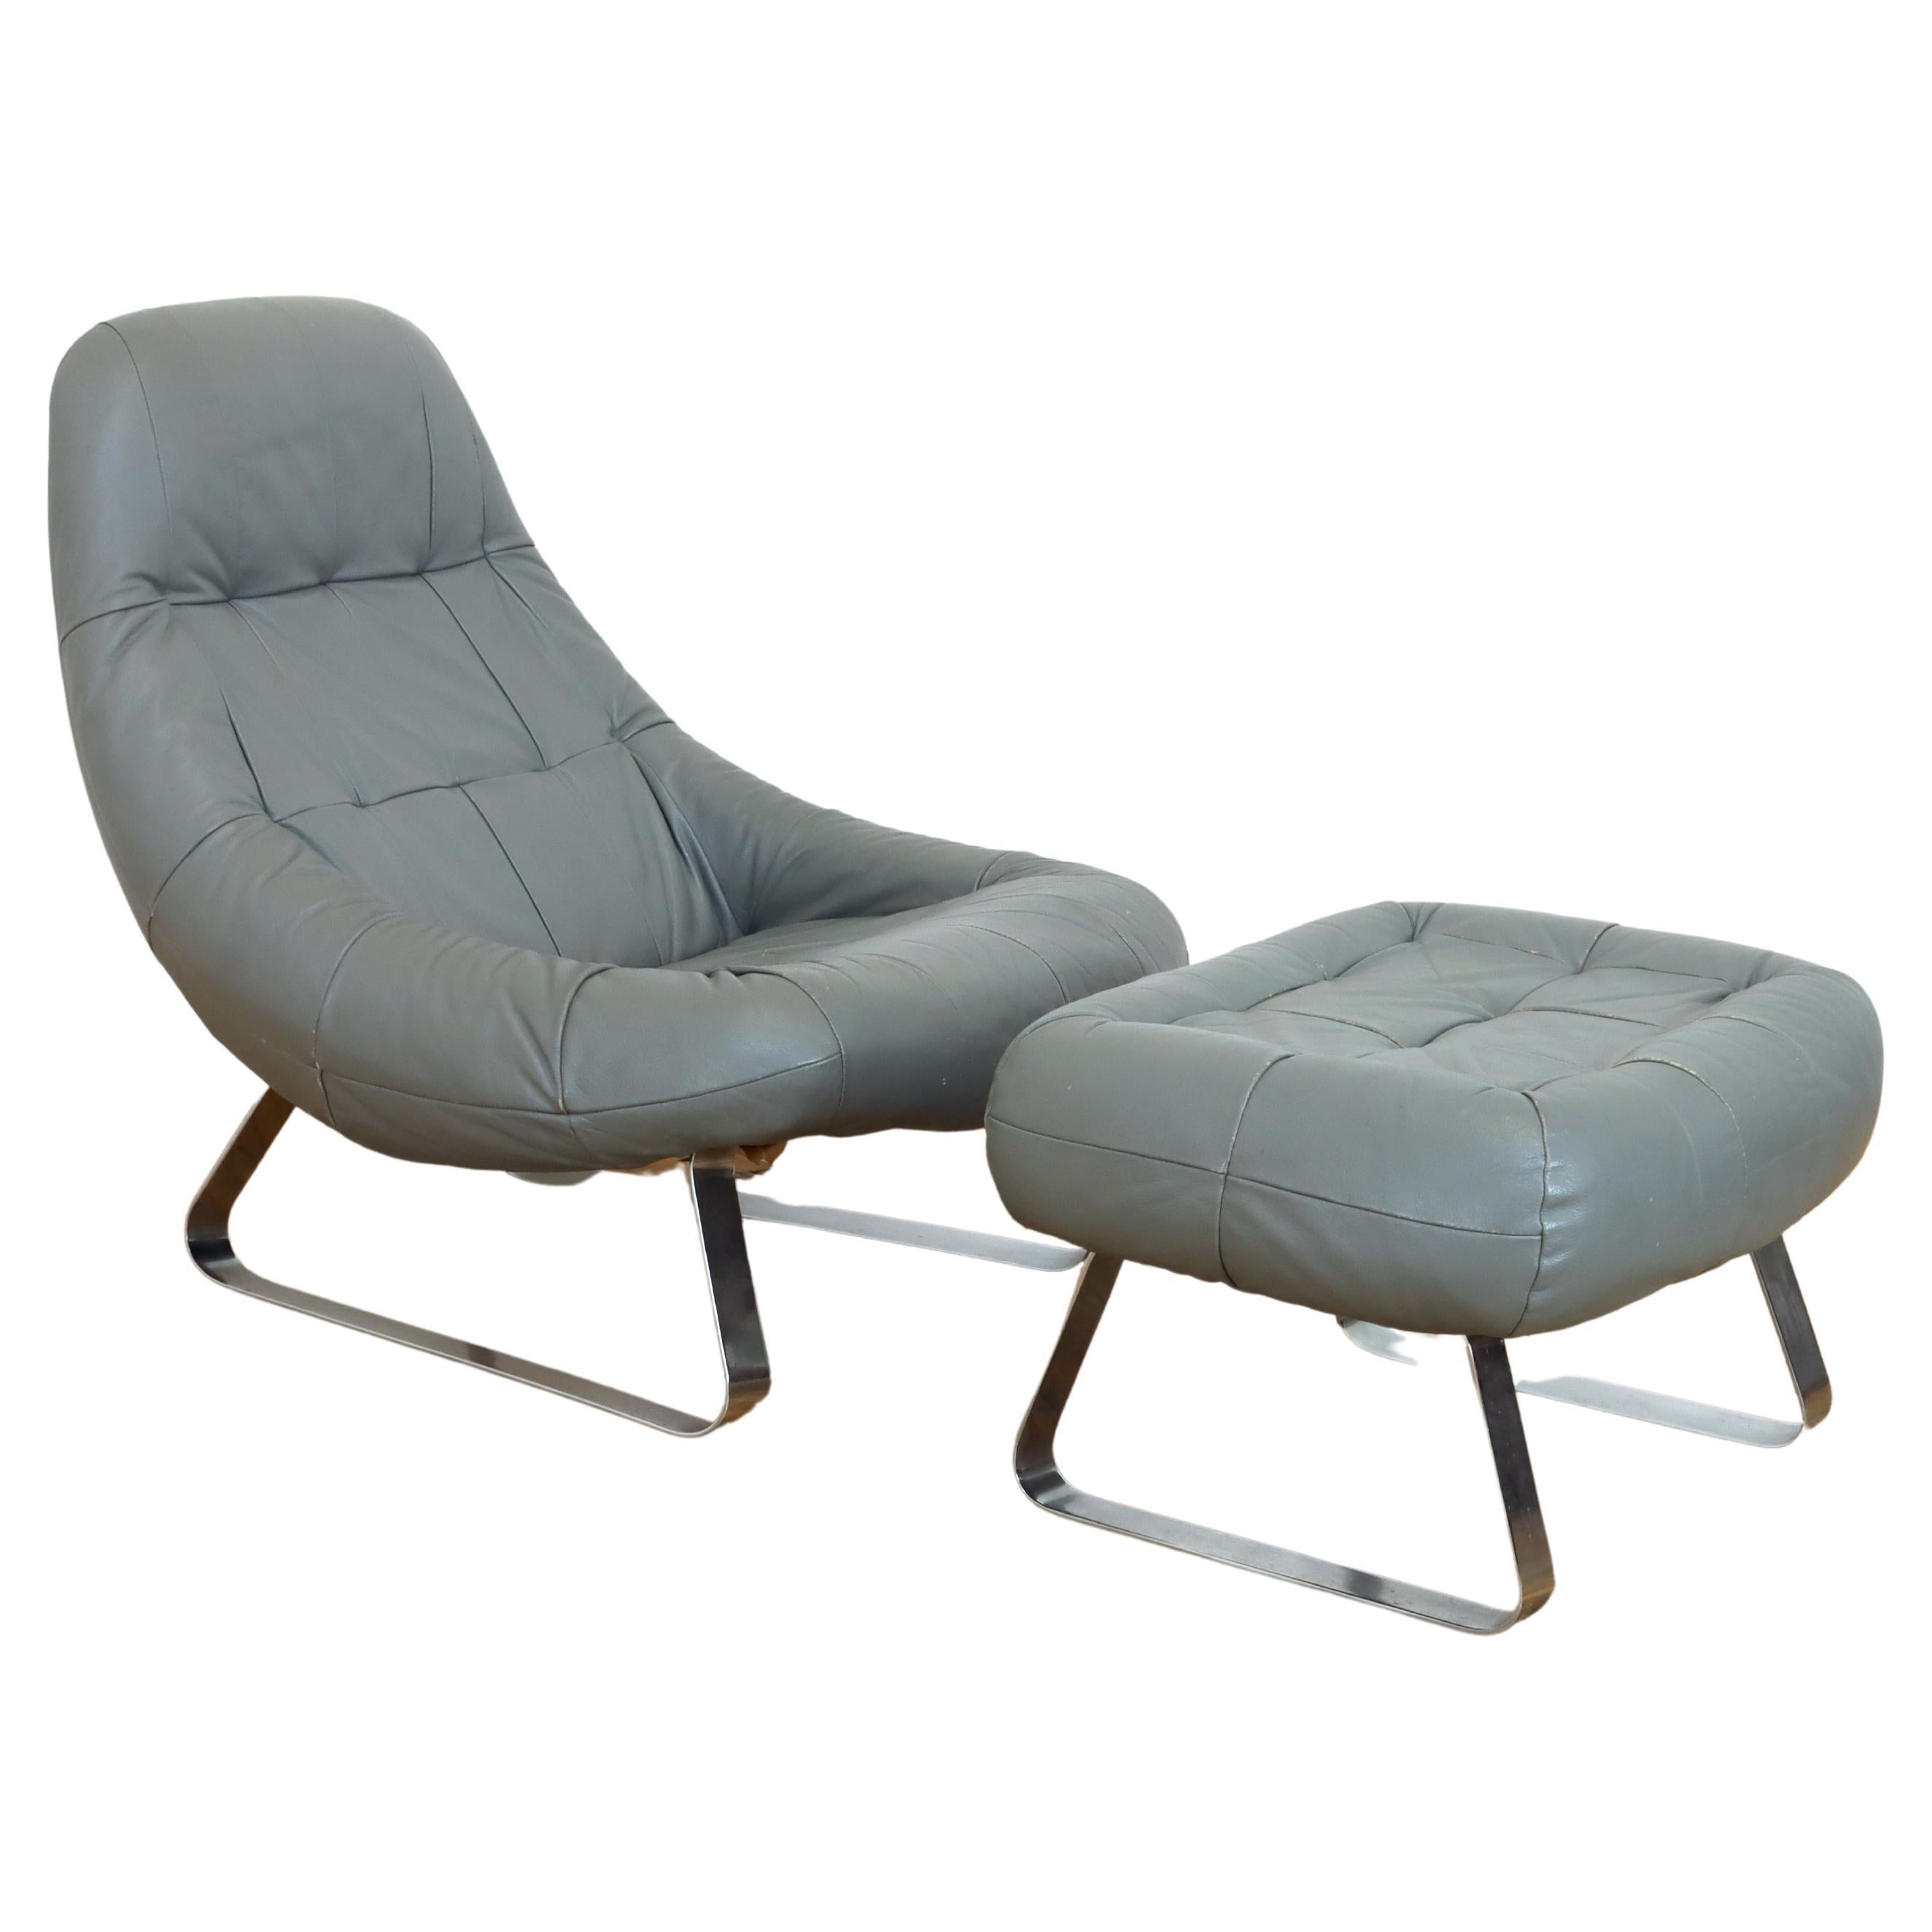 Percival Lafer "Earth" Lounge Chair and Ottoman